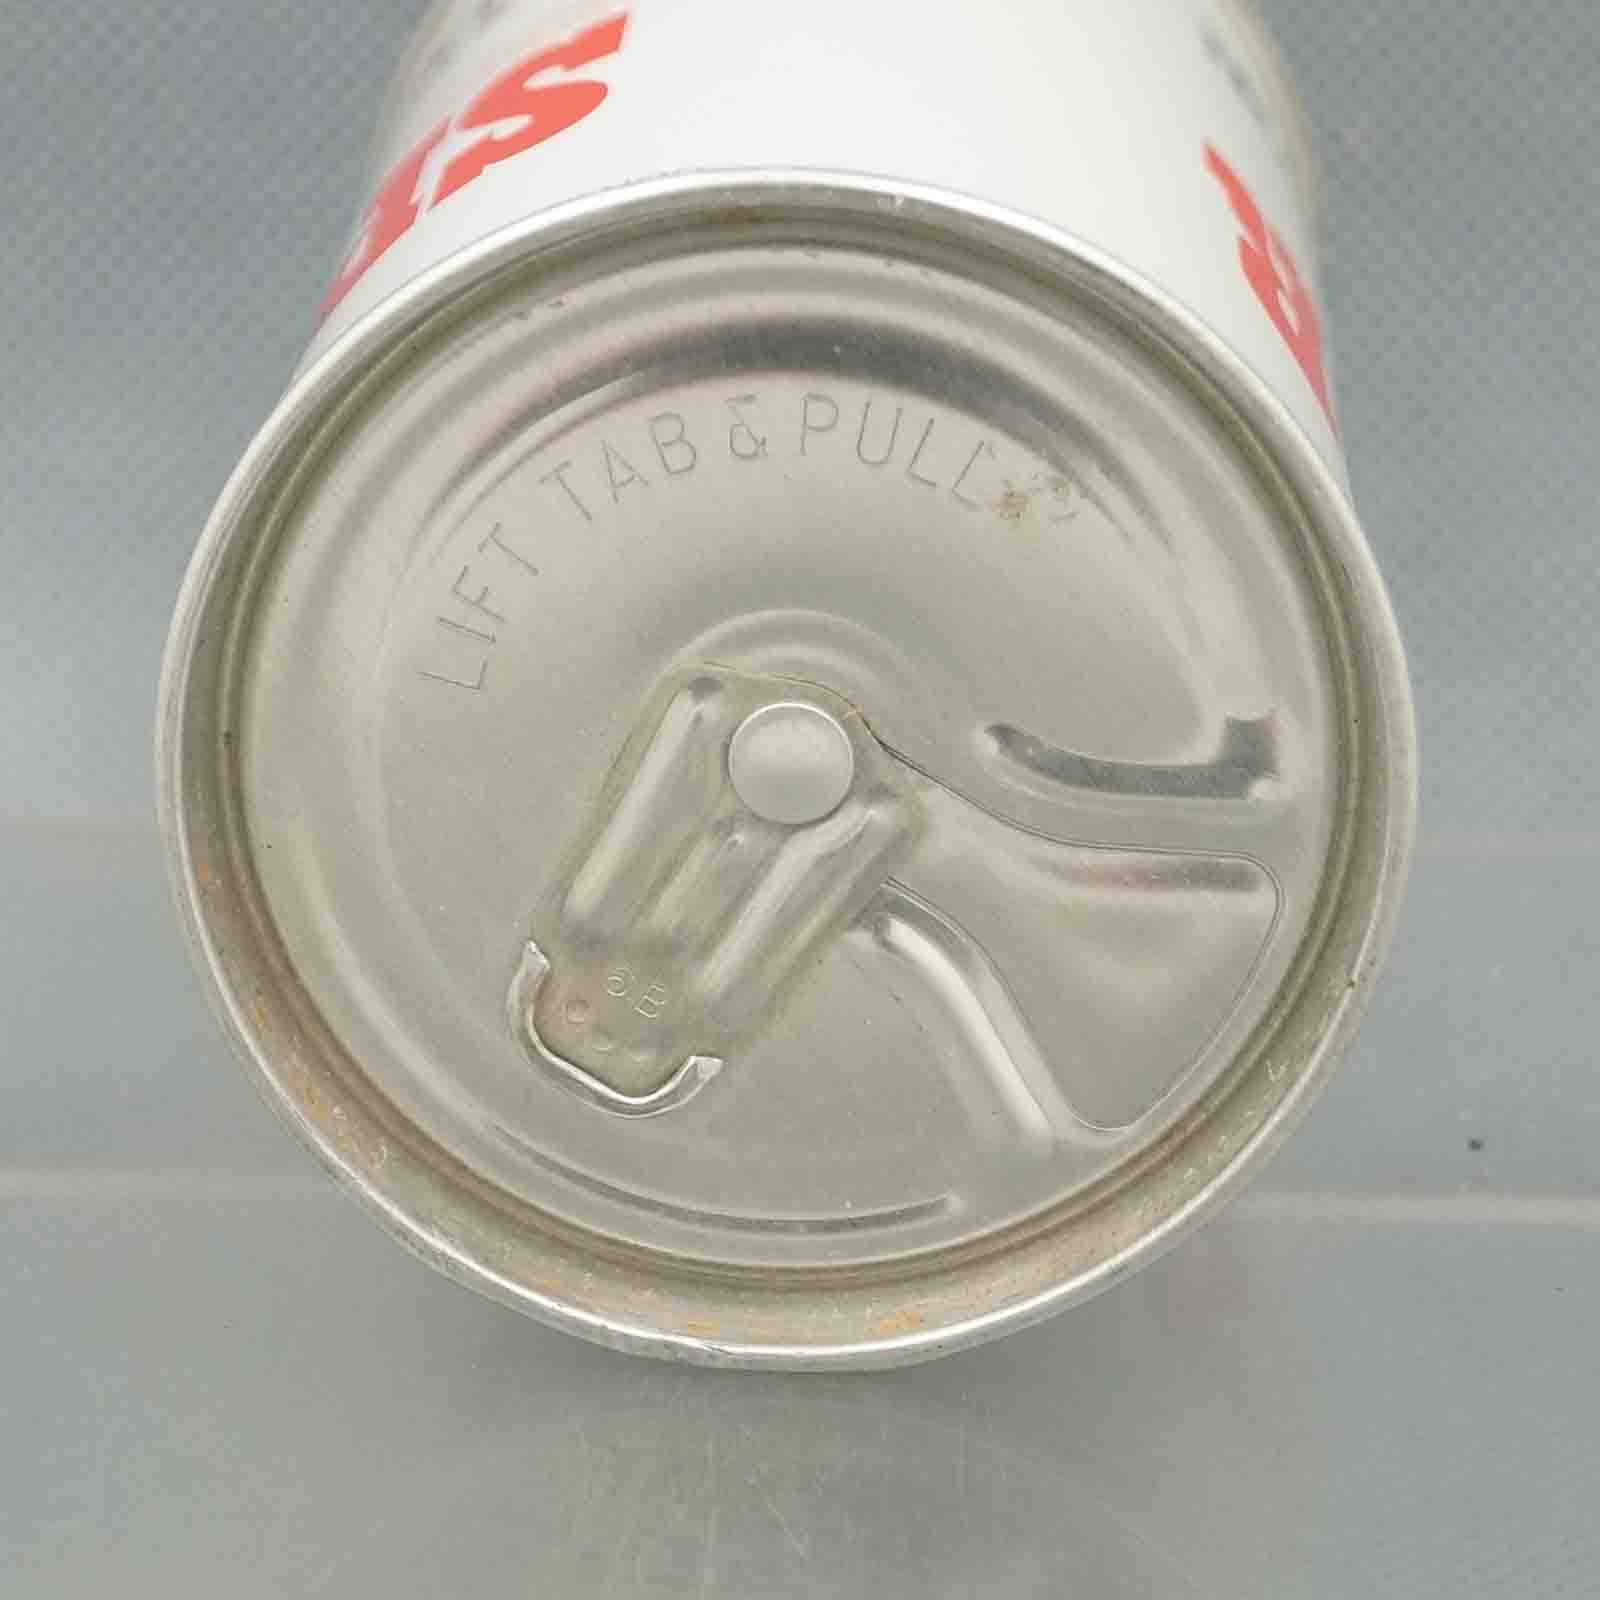 spur 245-38 pull tab beer can 5